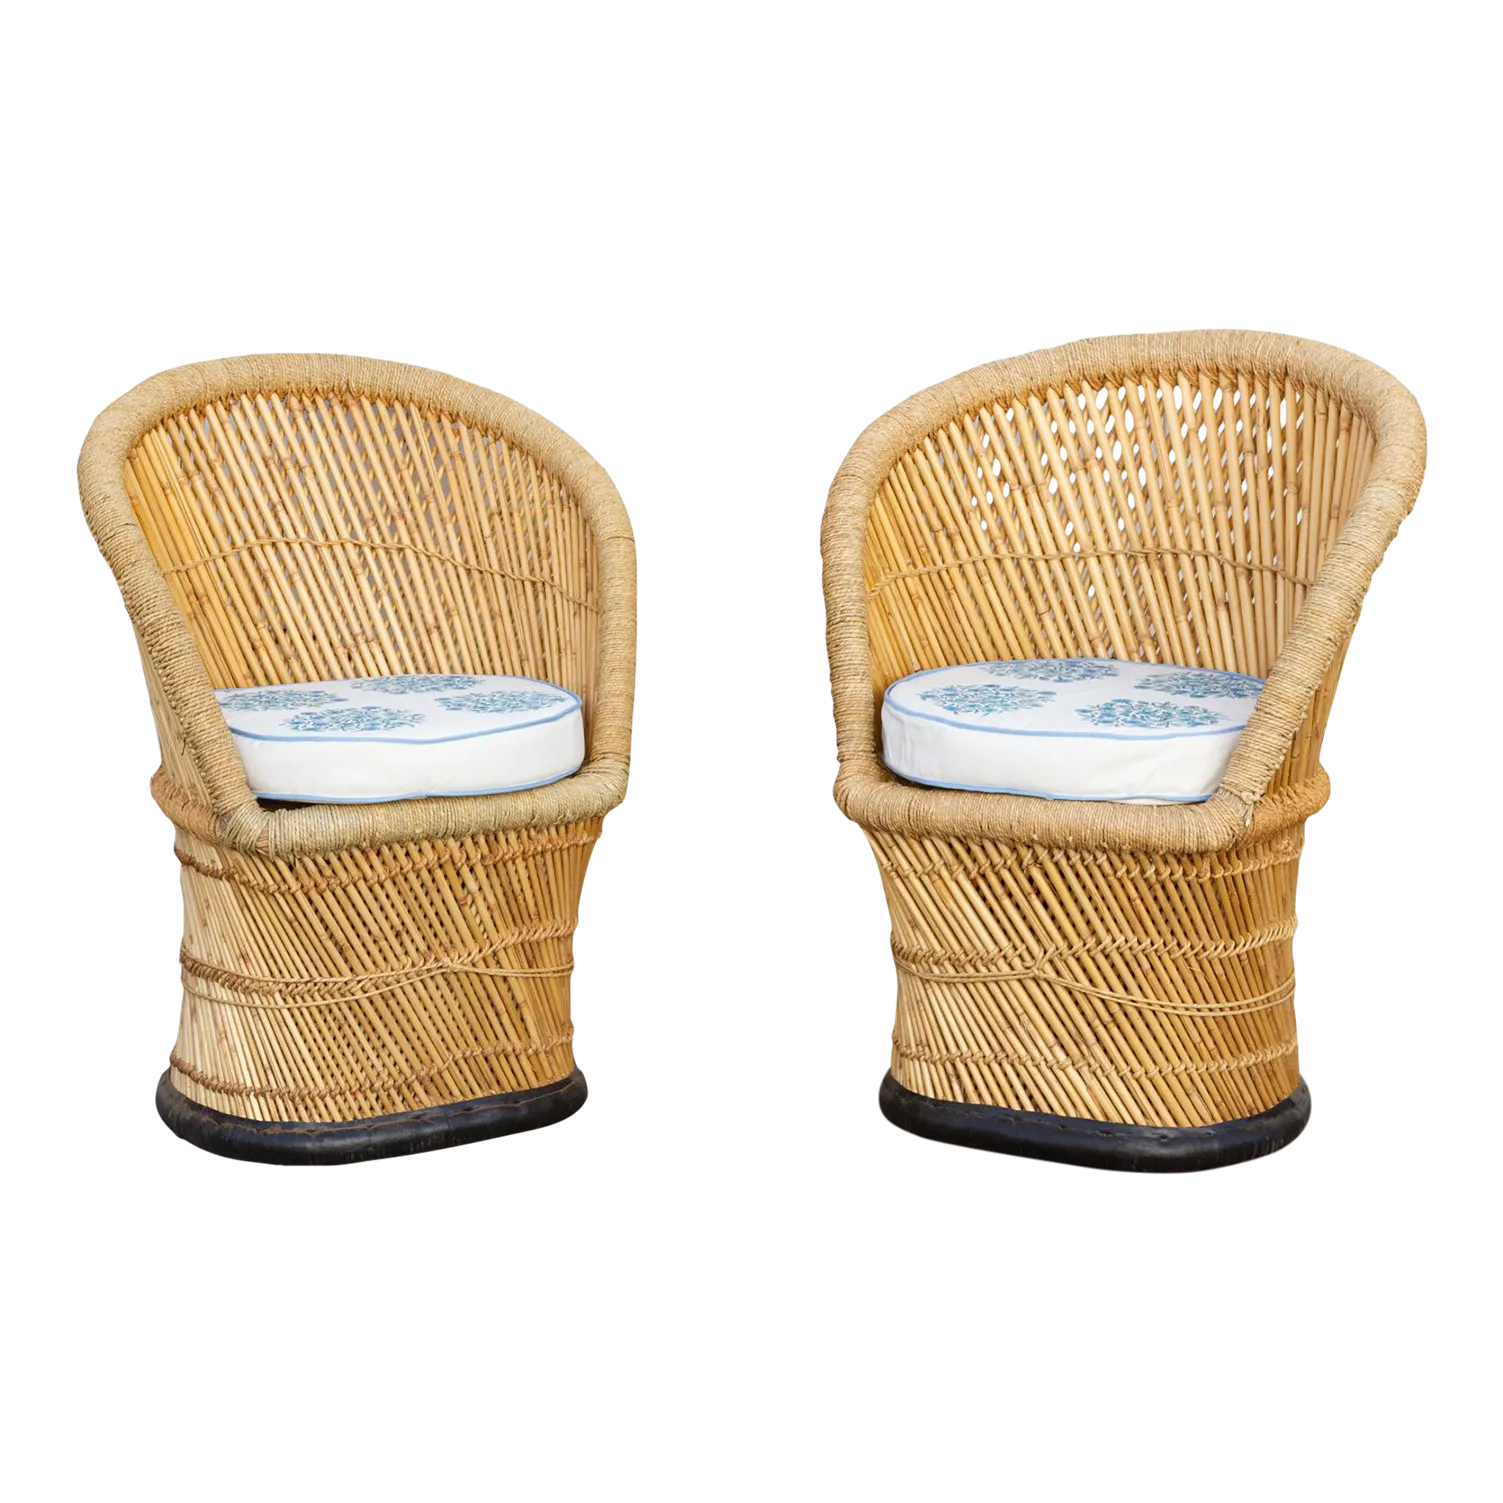 Pair of Cane & Jute Indian Outdoor Club Chairs - de-cor